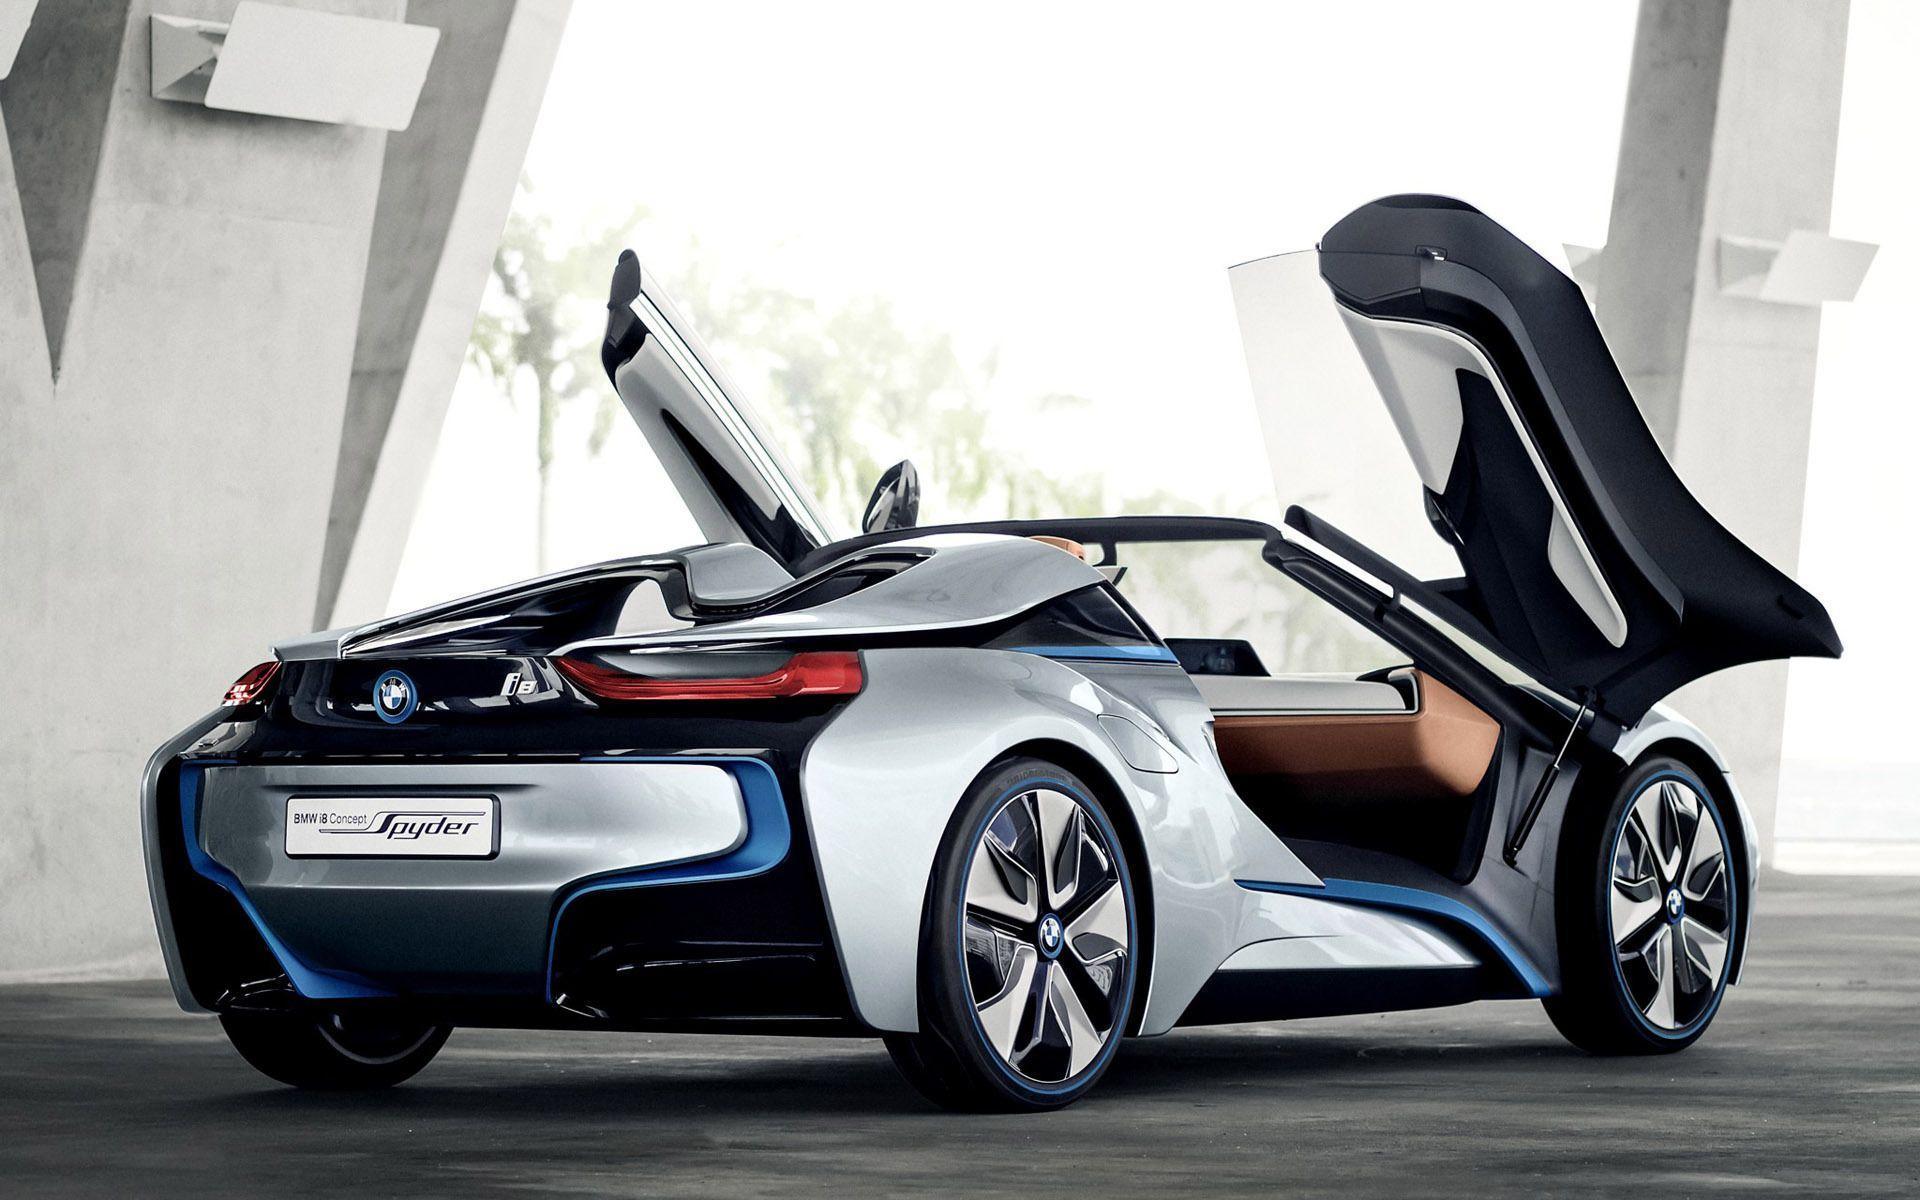 image about New BMW i8 HD Wallpaper. Cars